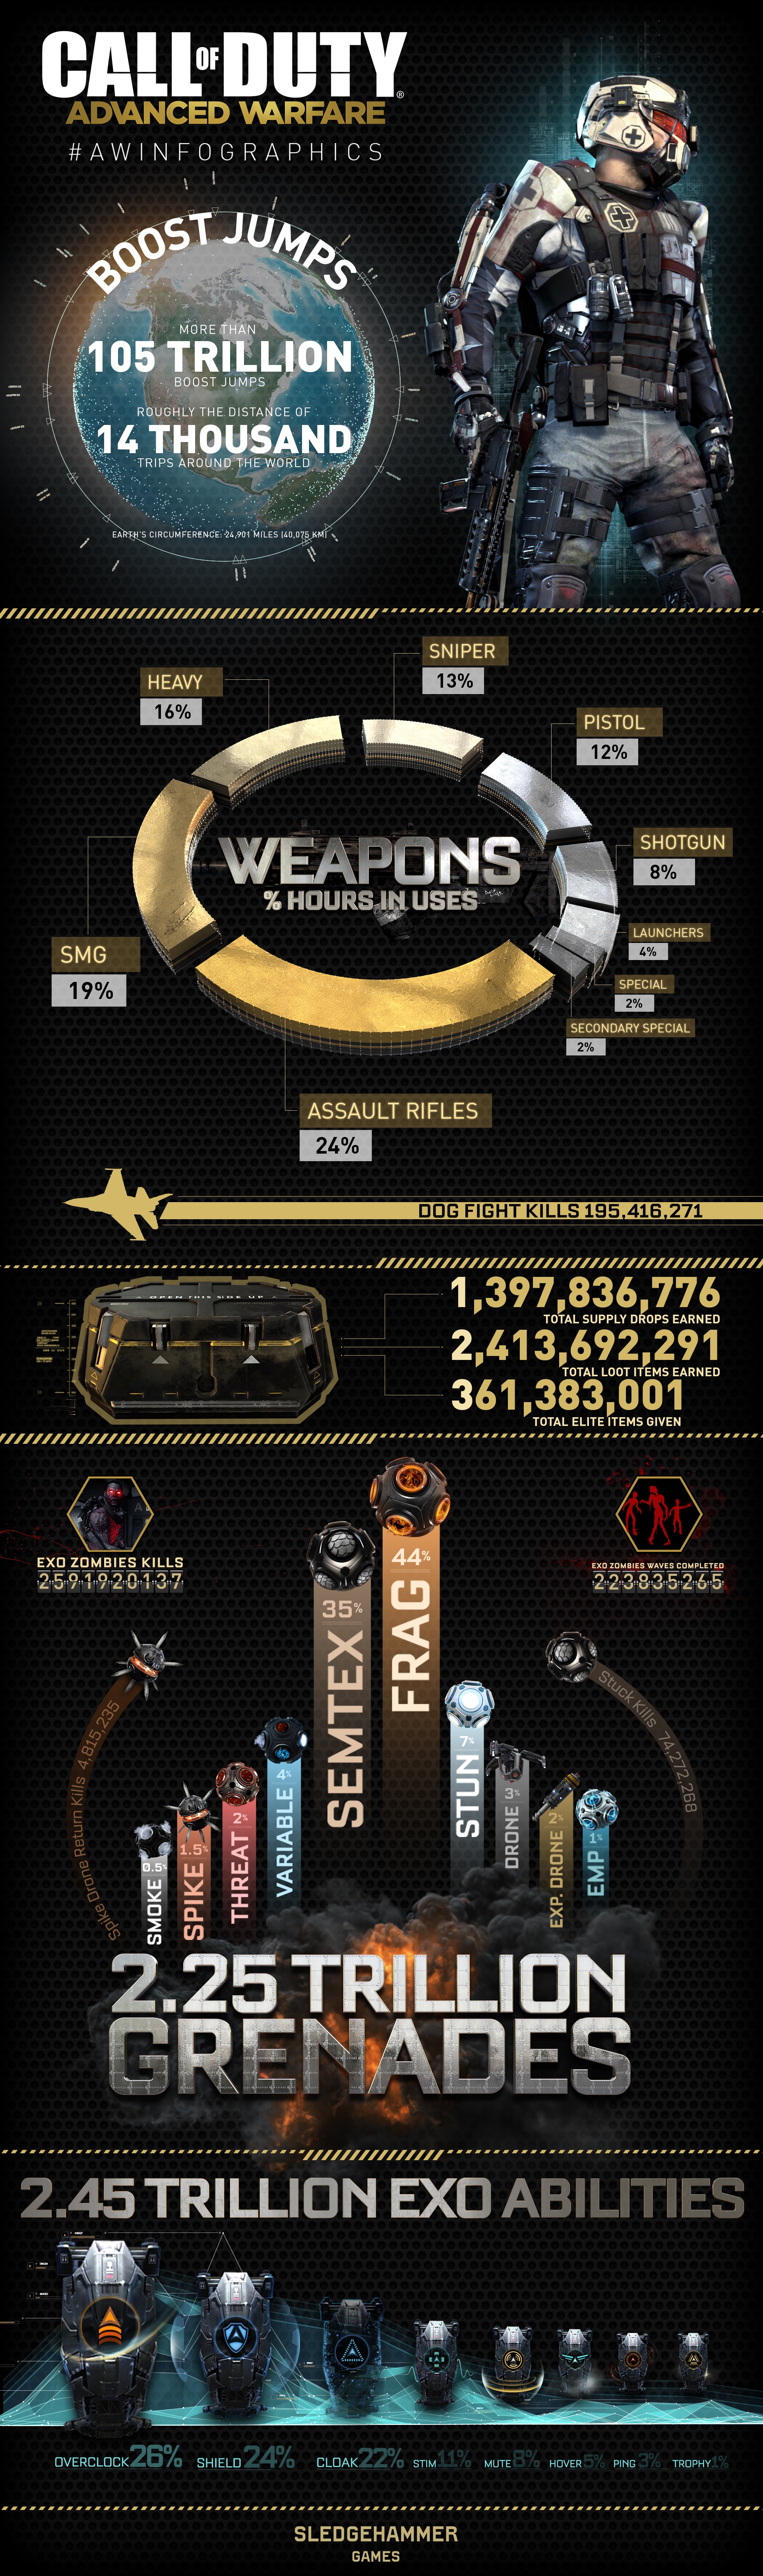 Call of Duty next-gen upgrade infographic